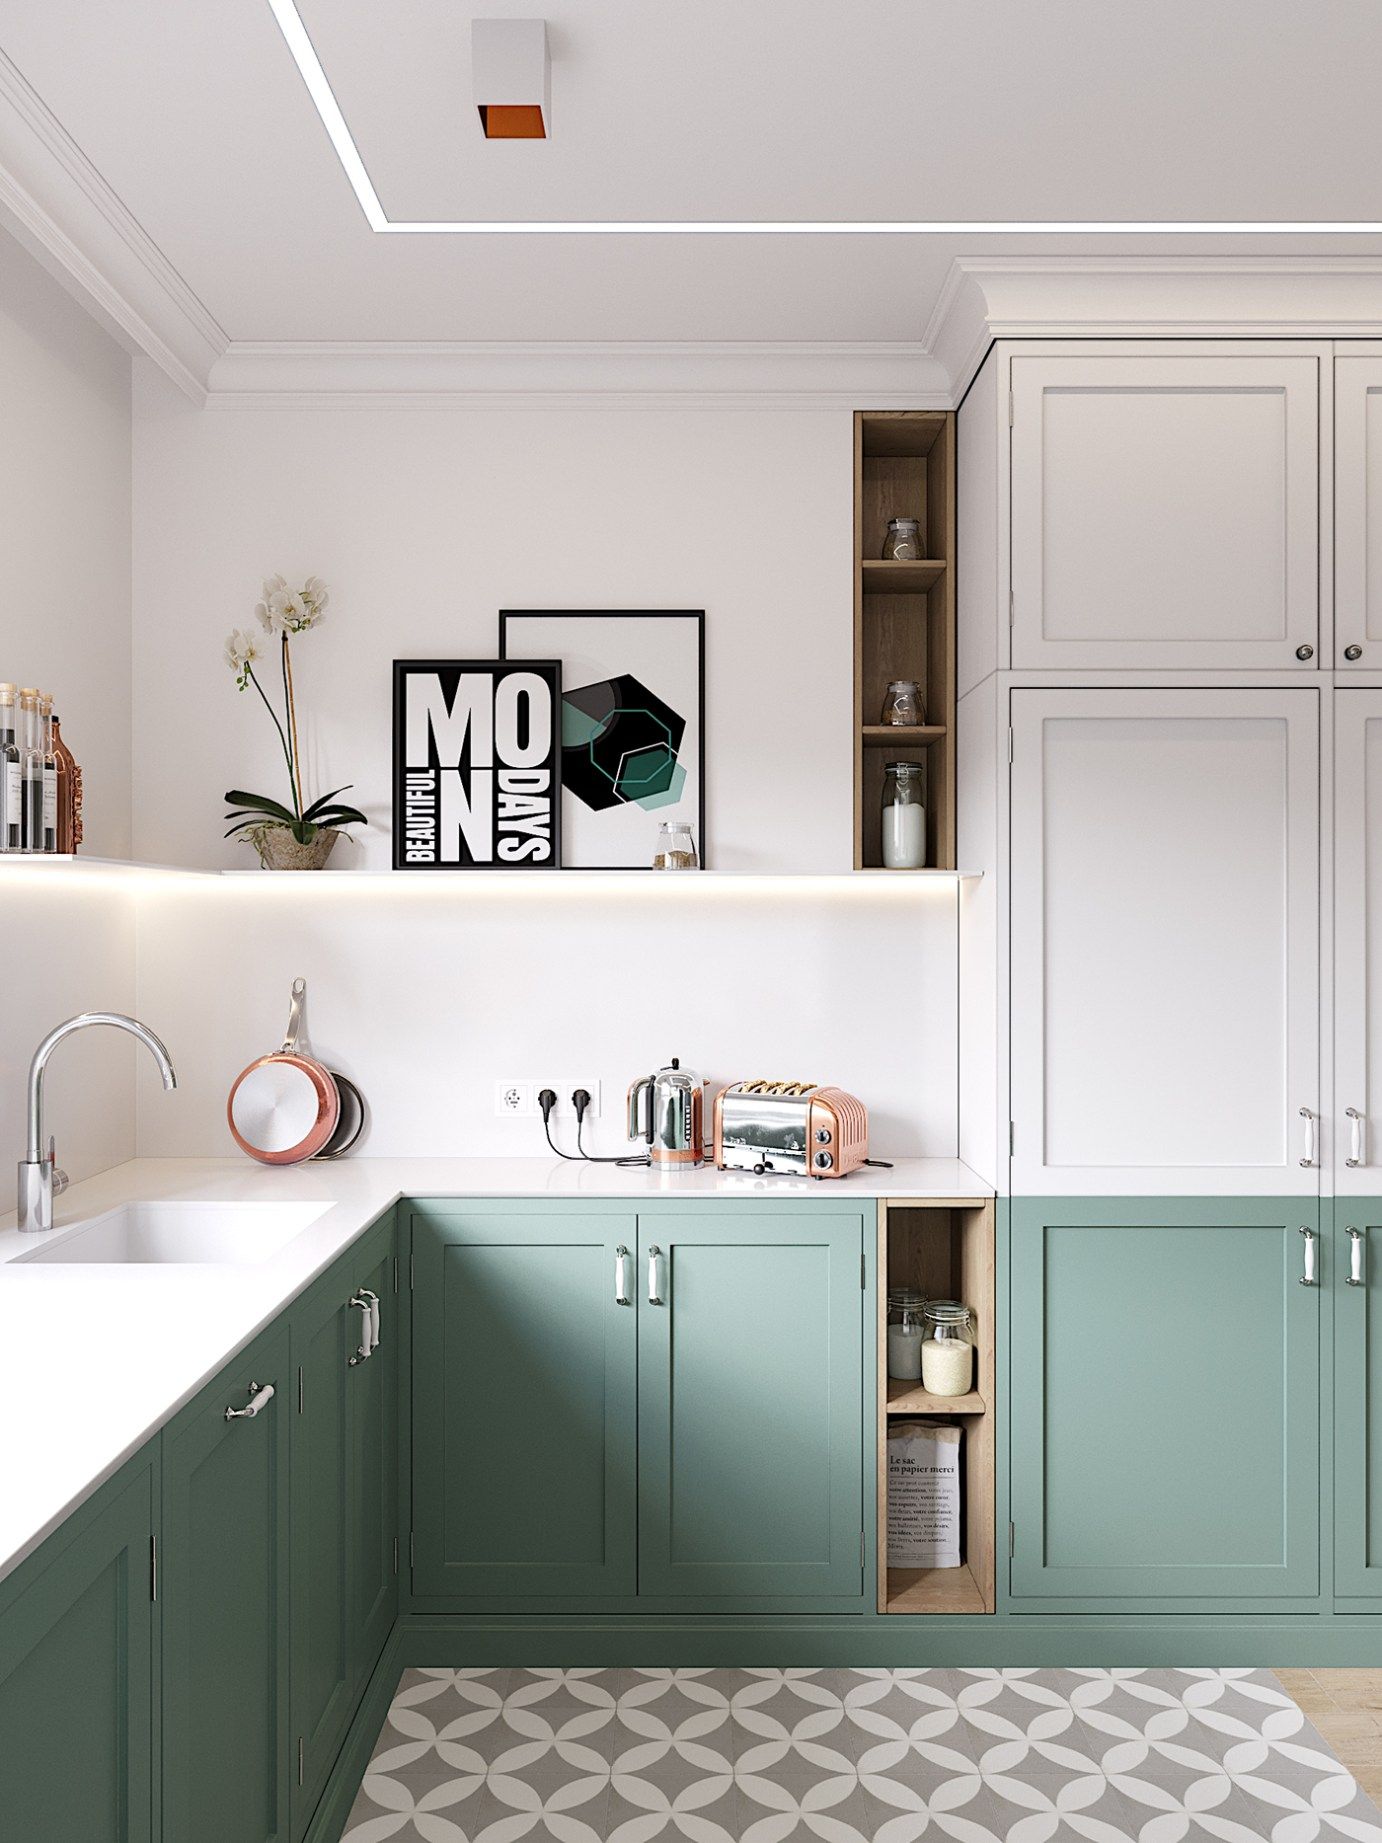 Transform Your Kitchen Cupboards with Creative Paint Design